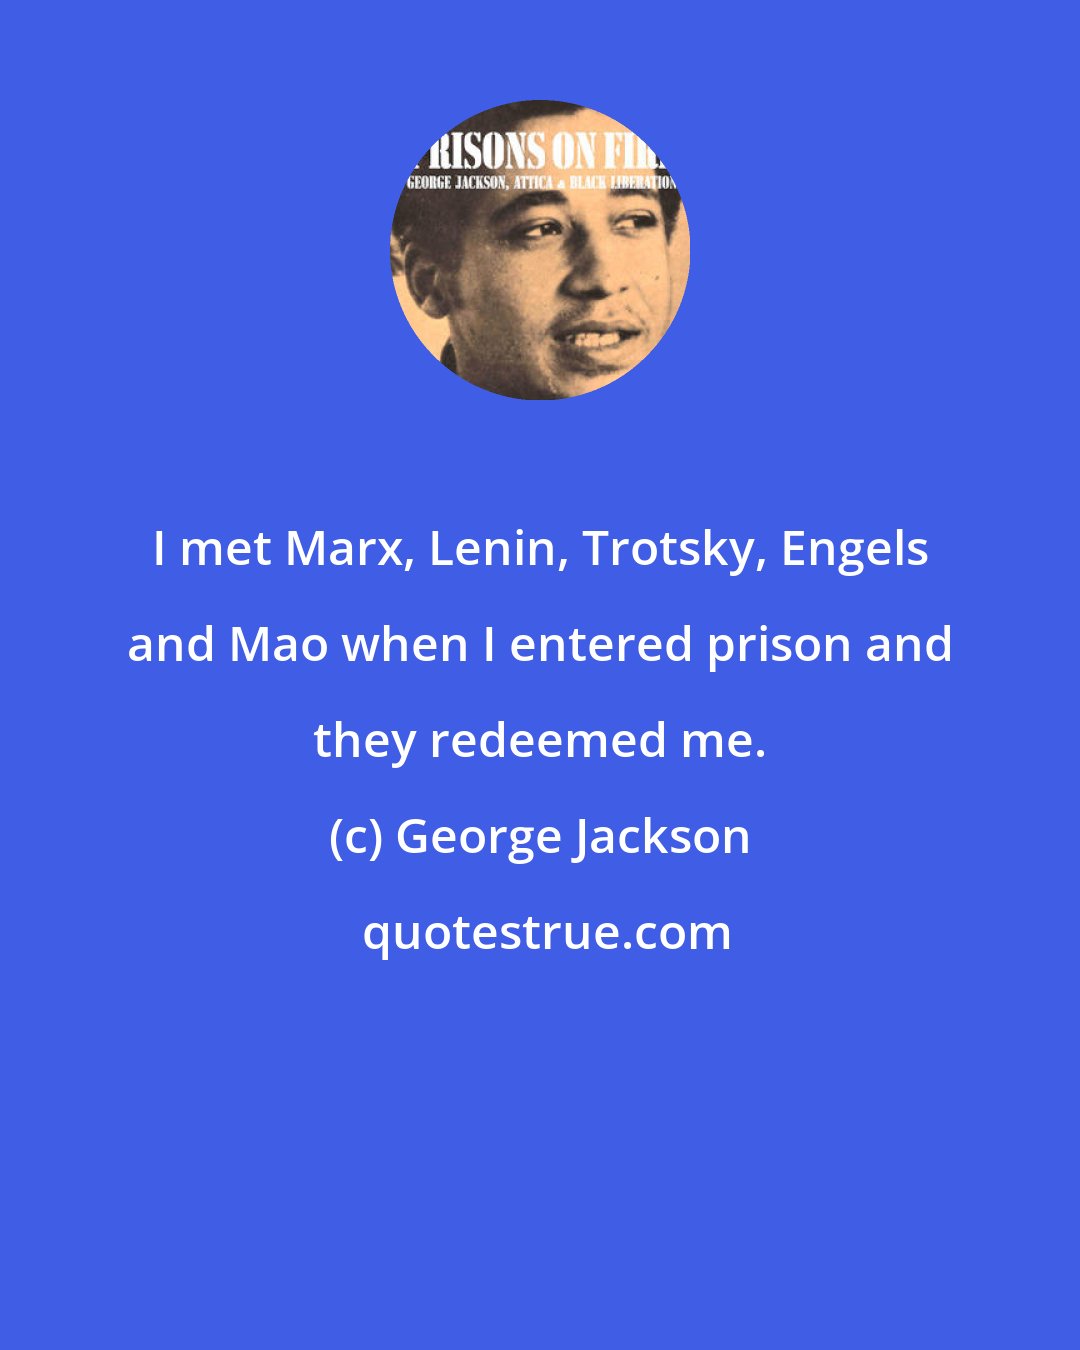 George Jackson: I met Marx, Lenin, Trotsky, Engels and Mao when I entered prison and they redeemed me.